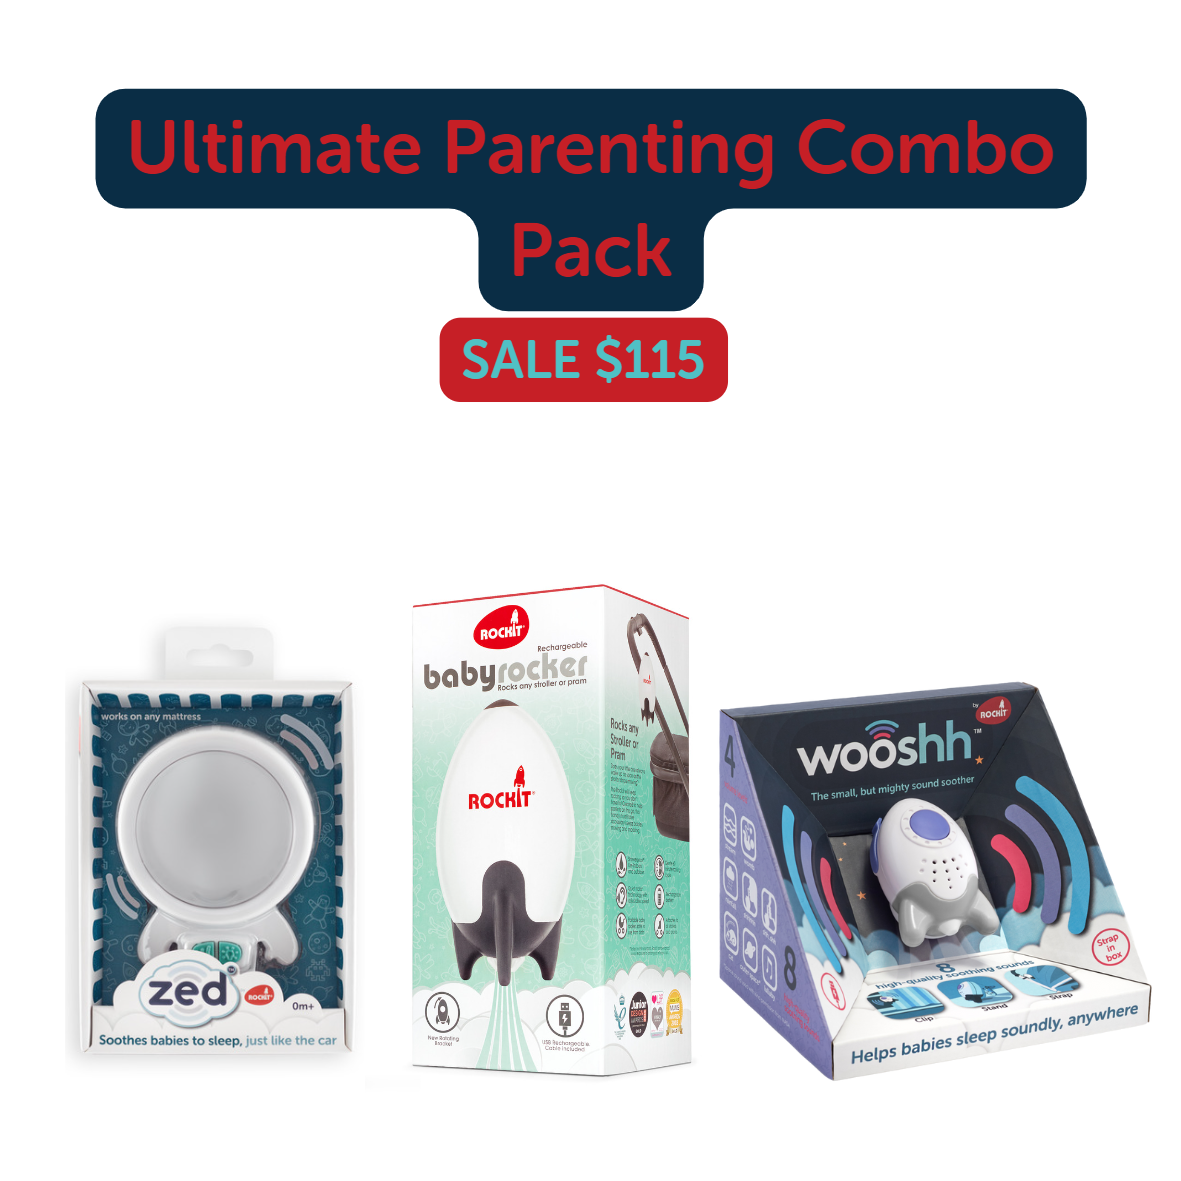 The Ultimate Parenting Combo Pack